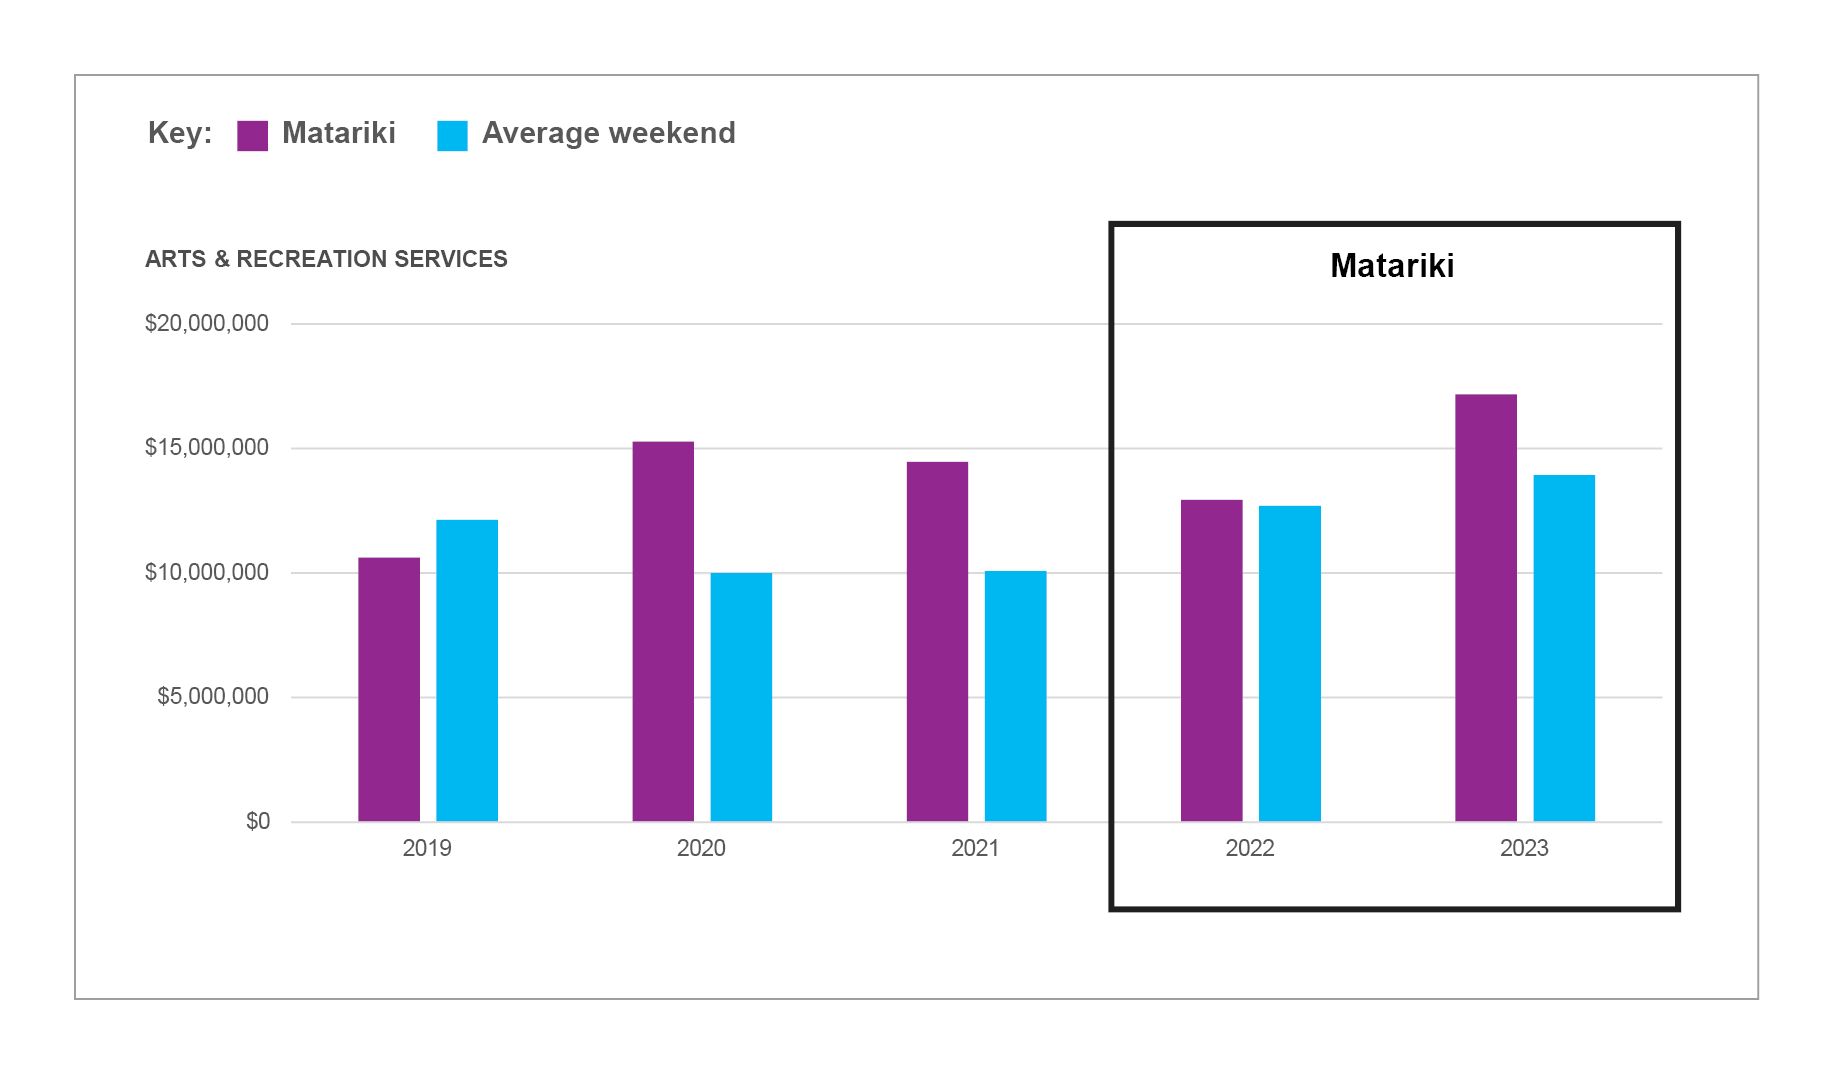 Bar graph showing the consumer spend over Matariki in the arts and recreation sector, there is a box around the  Matariki bars.